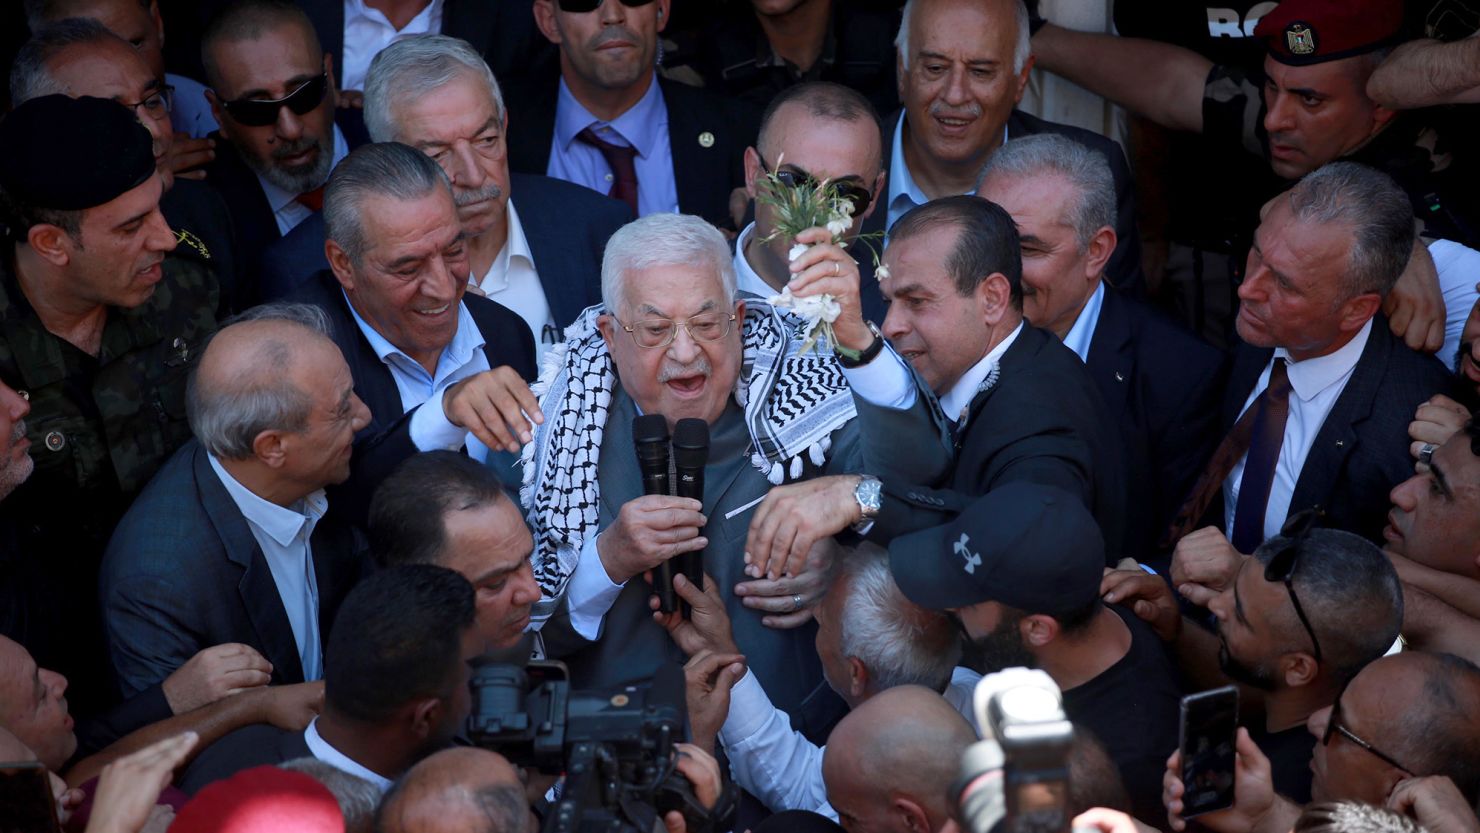 Palestinian President Mahmoud Abbas addresses the crowd during his visit to Jenin Refugee Camp, in the West Bank on Wednesday.